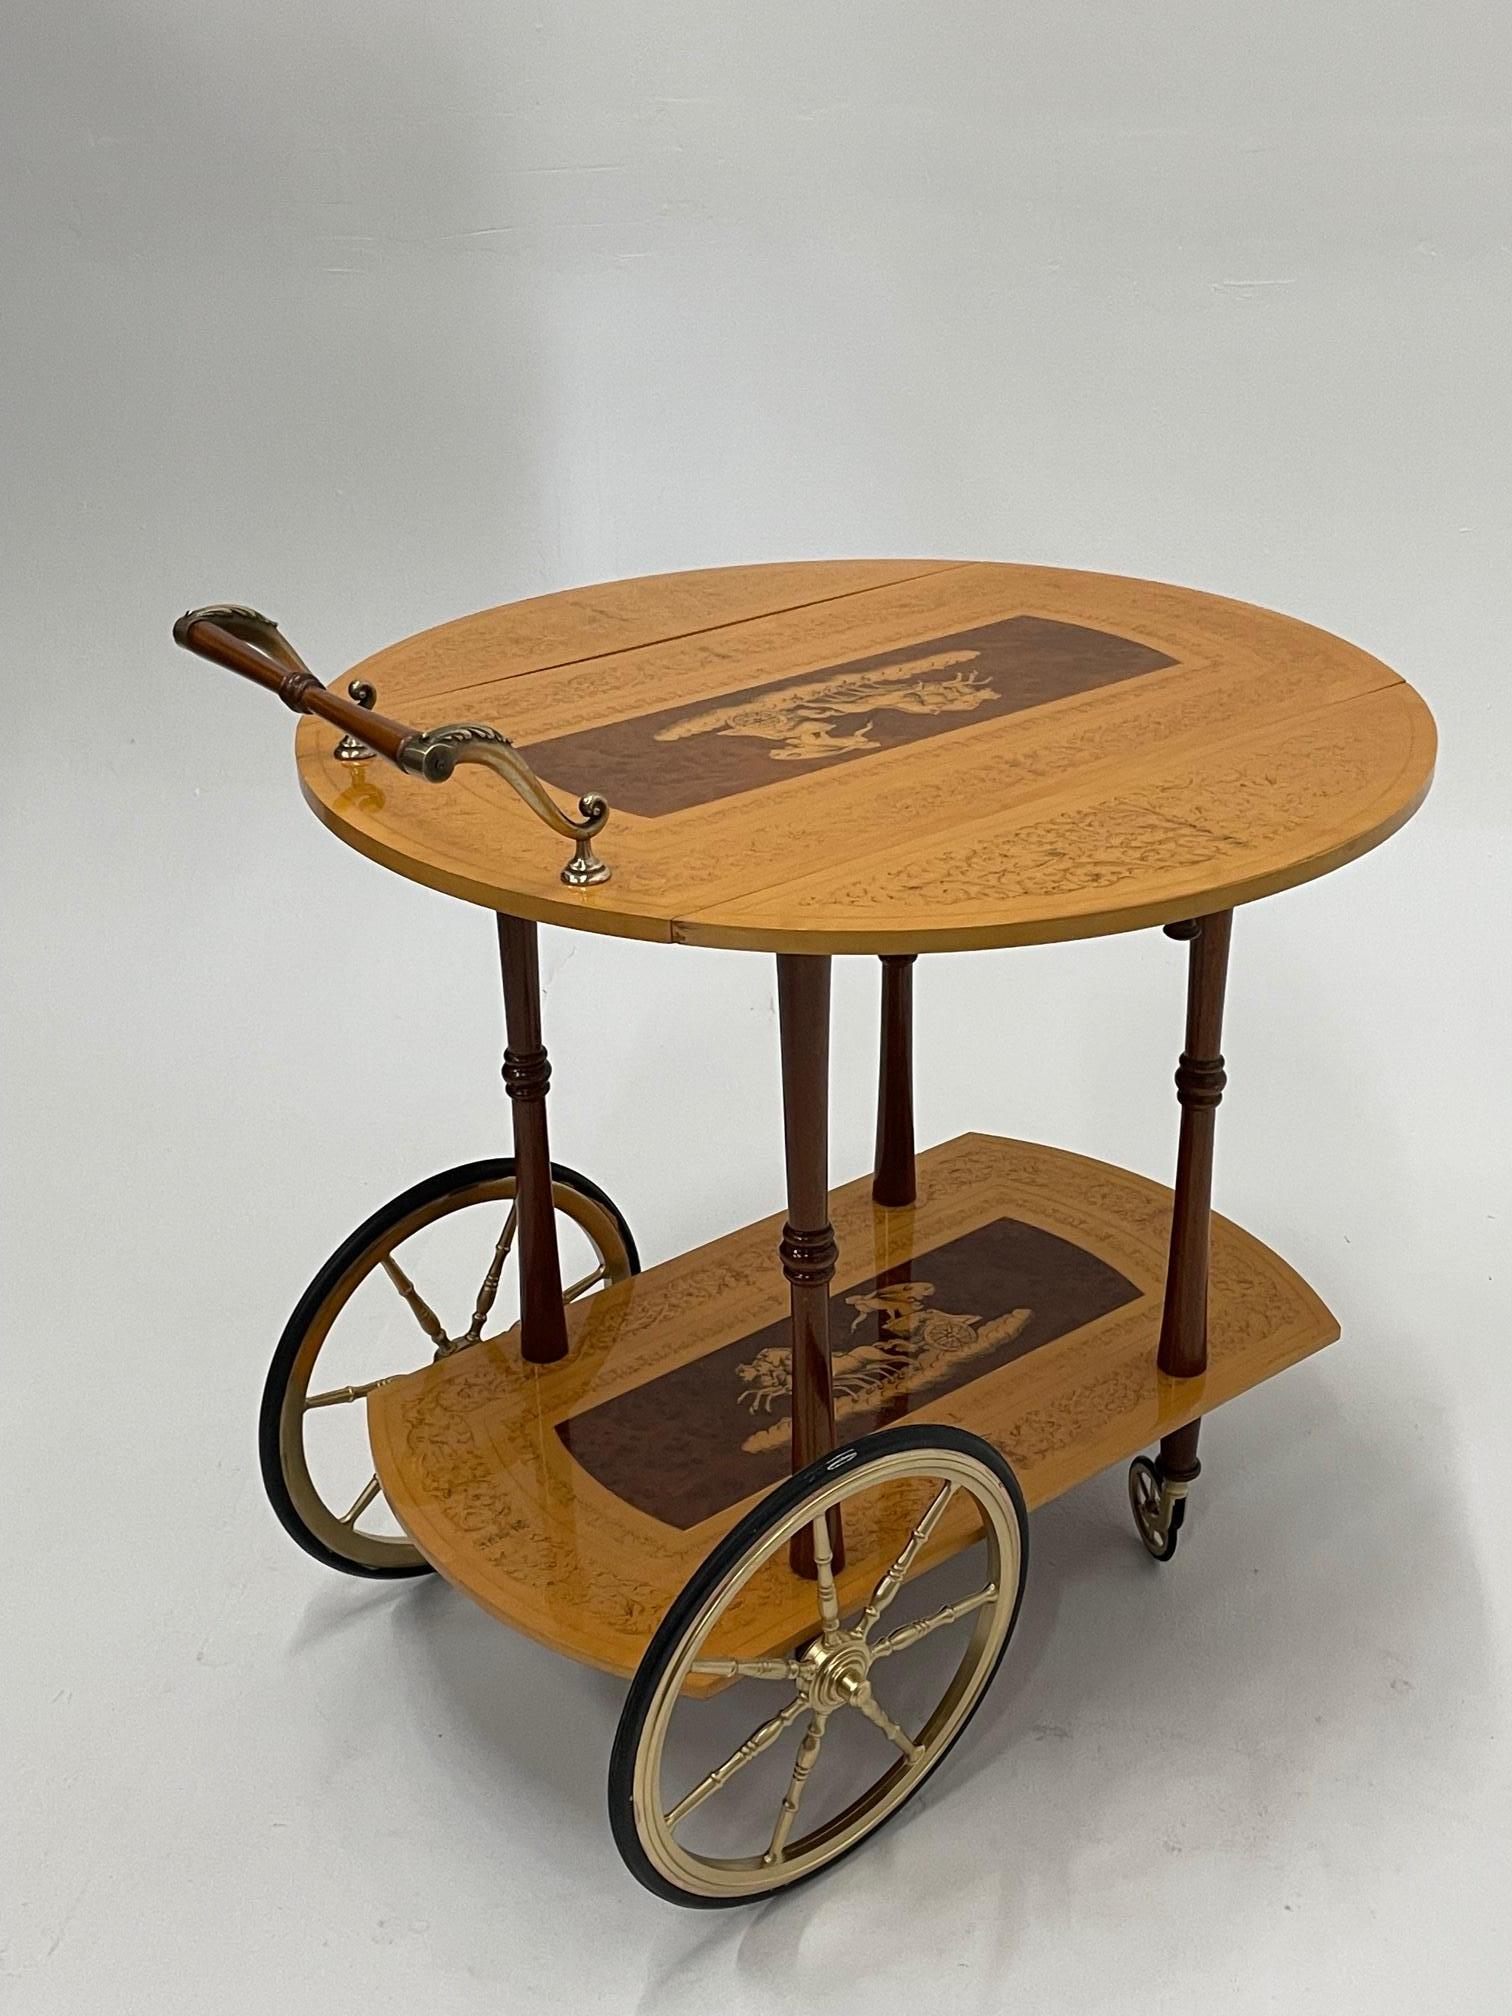 A lovely birch and mahogany bar cart having stencil decoration and inlaid chariot scene with drop leaves, bottom tier, and gorgeous brass wheels and handle. When leaves are extended the cart is round and 27.5 diameter. 16.5 D with sides down
Artist